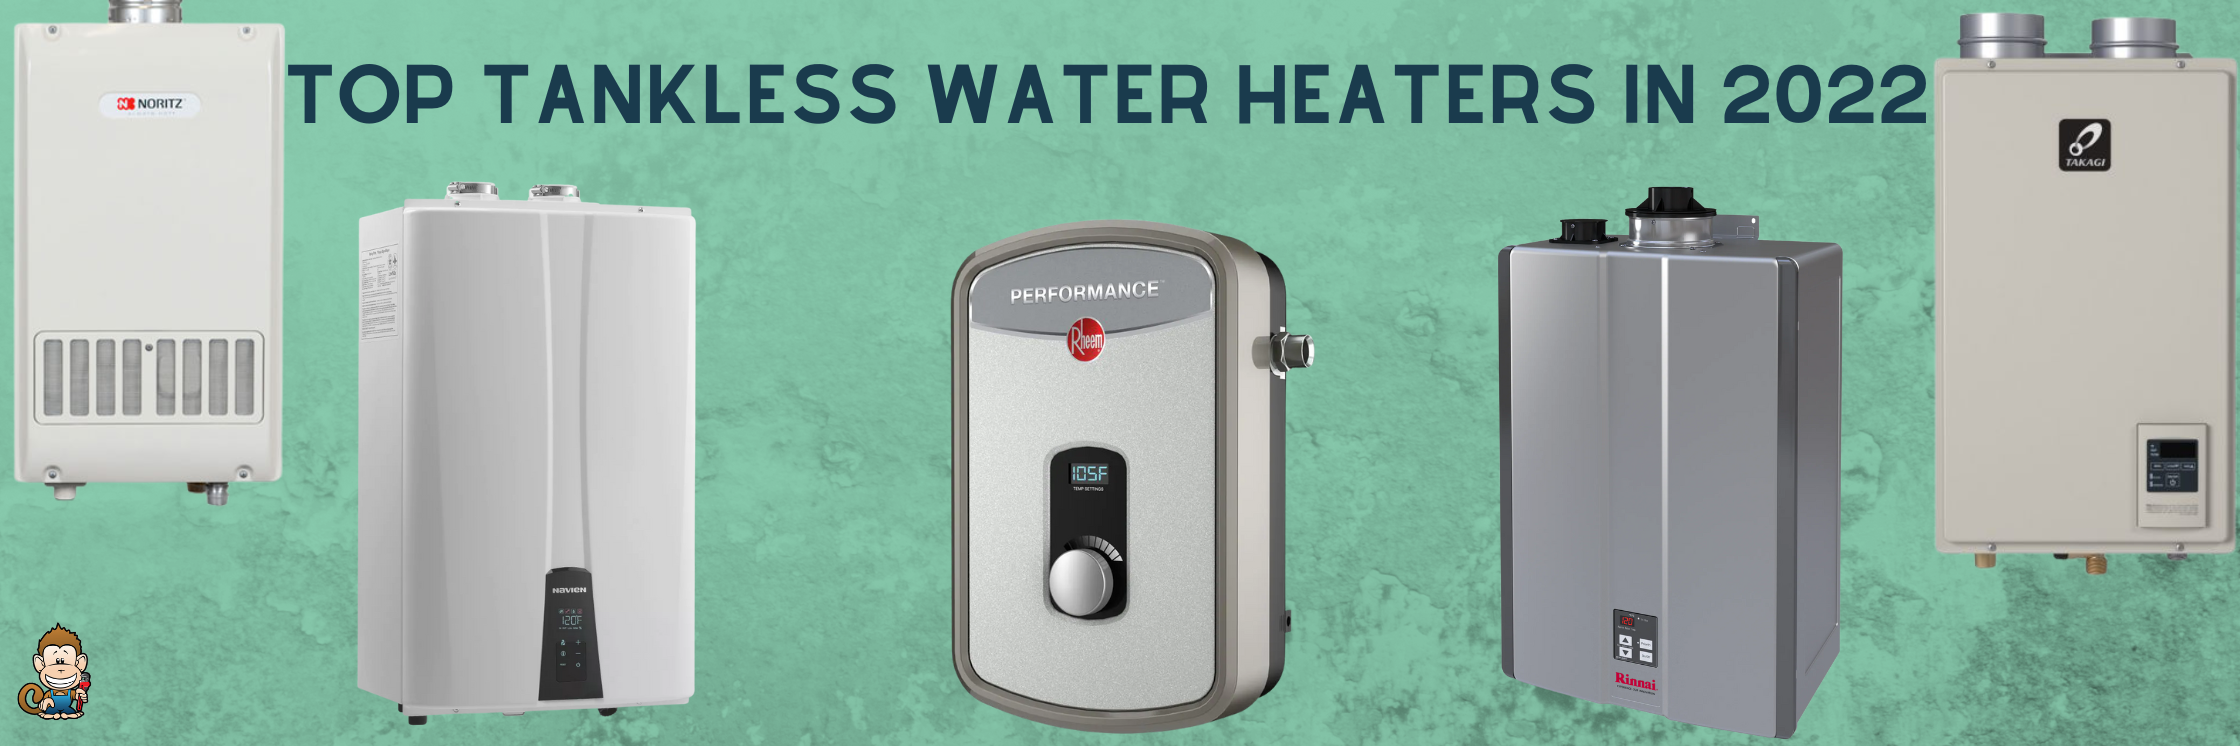 Top Tankless Water Heaters in 2022